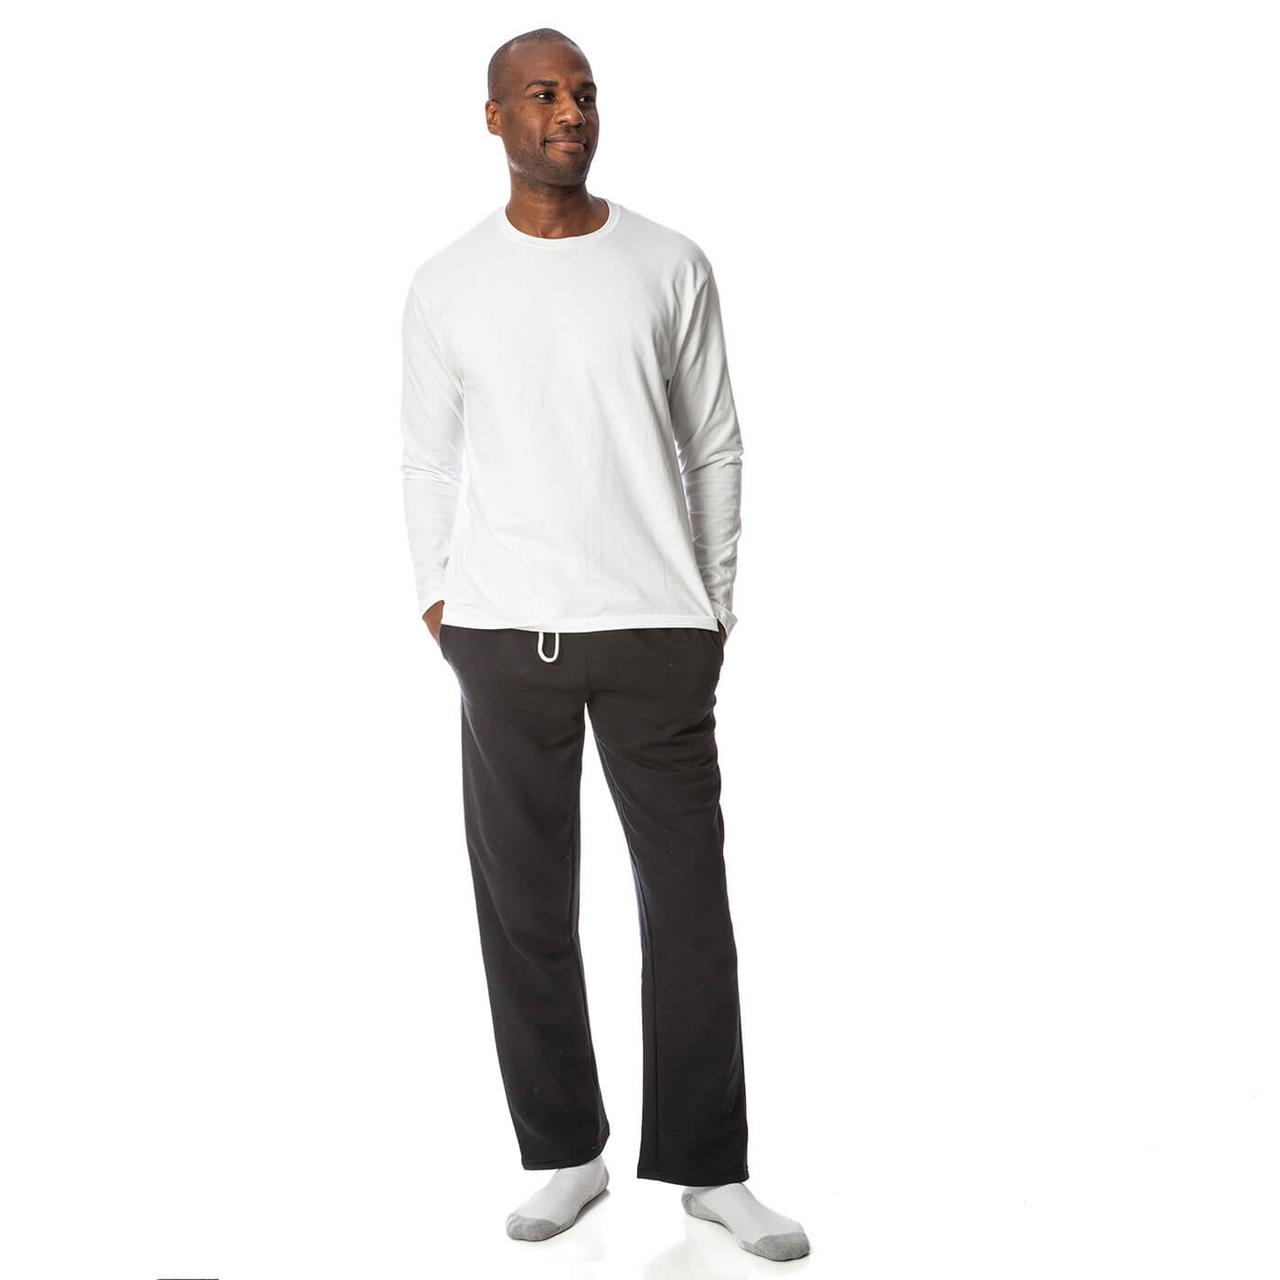 Adult Elastic Bottom Sweatpants with Pockets (Style# T2630PR)